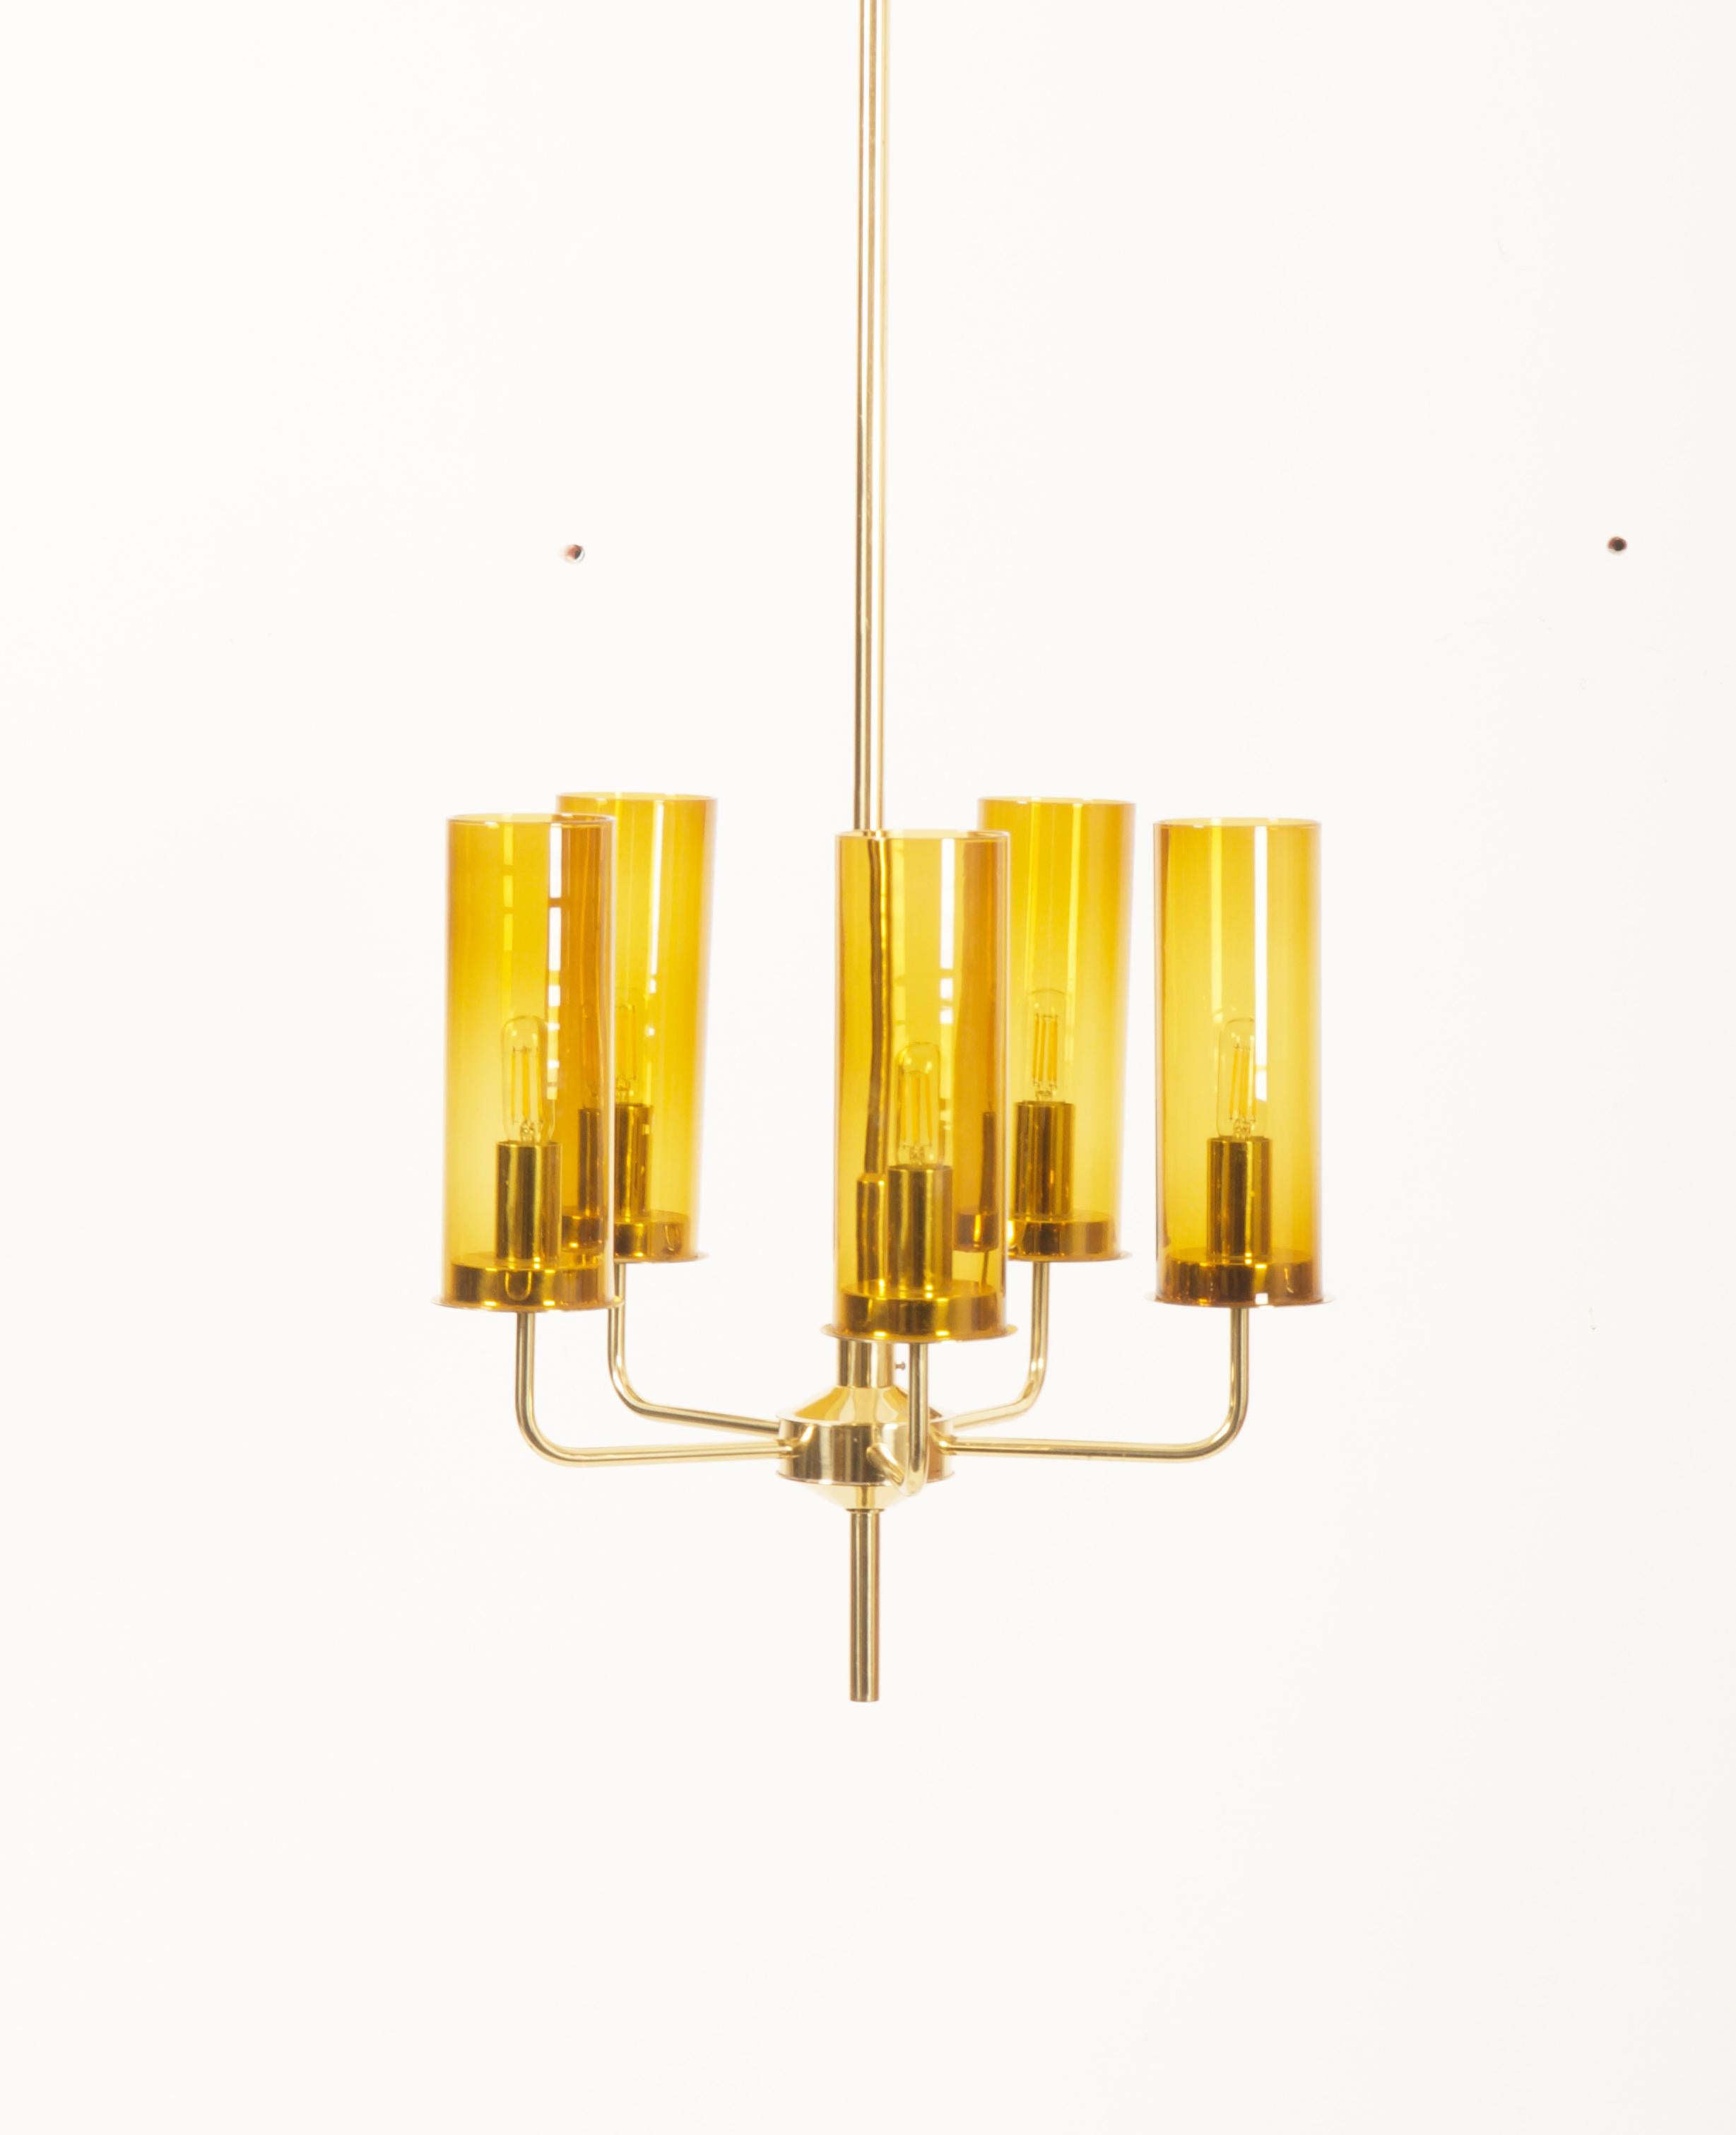 Brass frame with 5 anber glass tubes model T-434/5 ‘Sonata’ designed in the 1960s by Hans-Agne Jakobsson and produced by Hans-Agne Jakobsson AB in Markaryd, Sweden. Total height is now 175cm 68.90